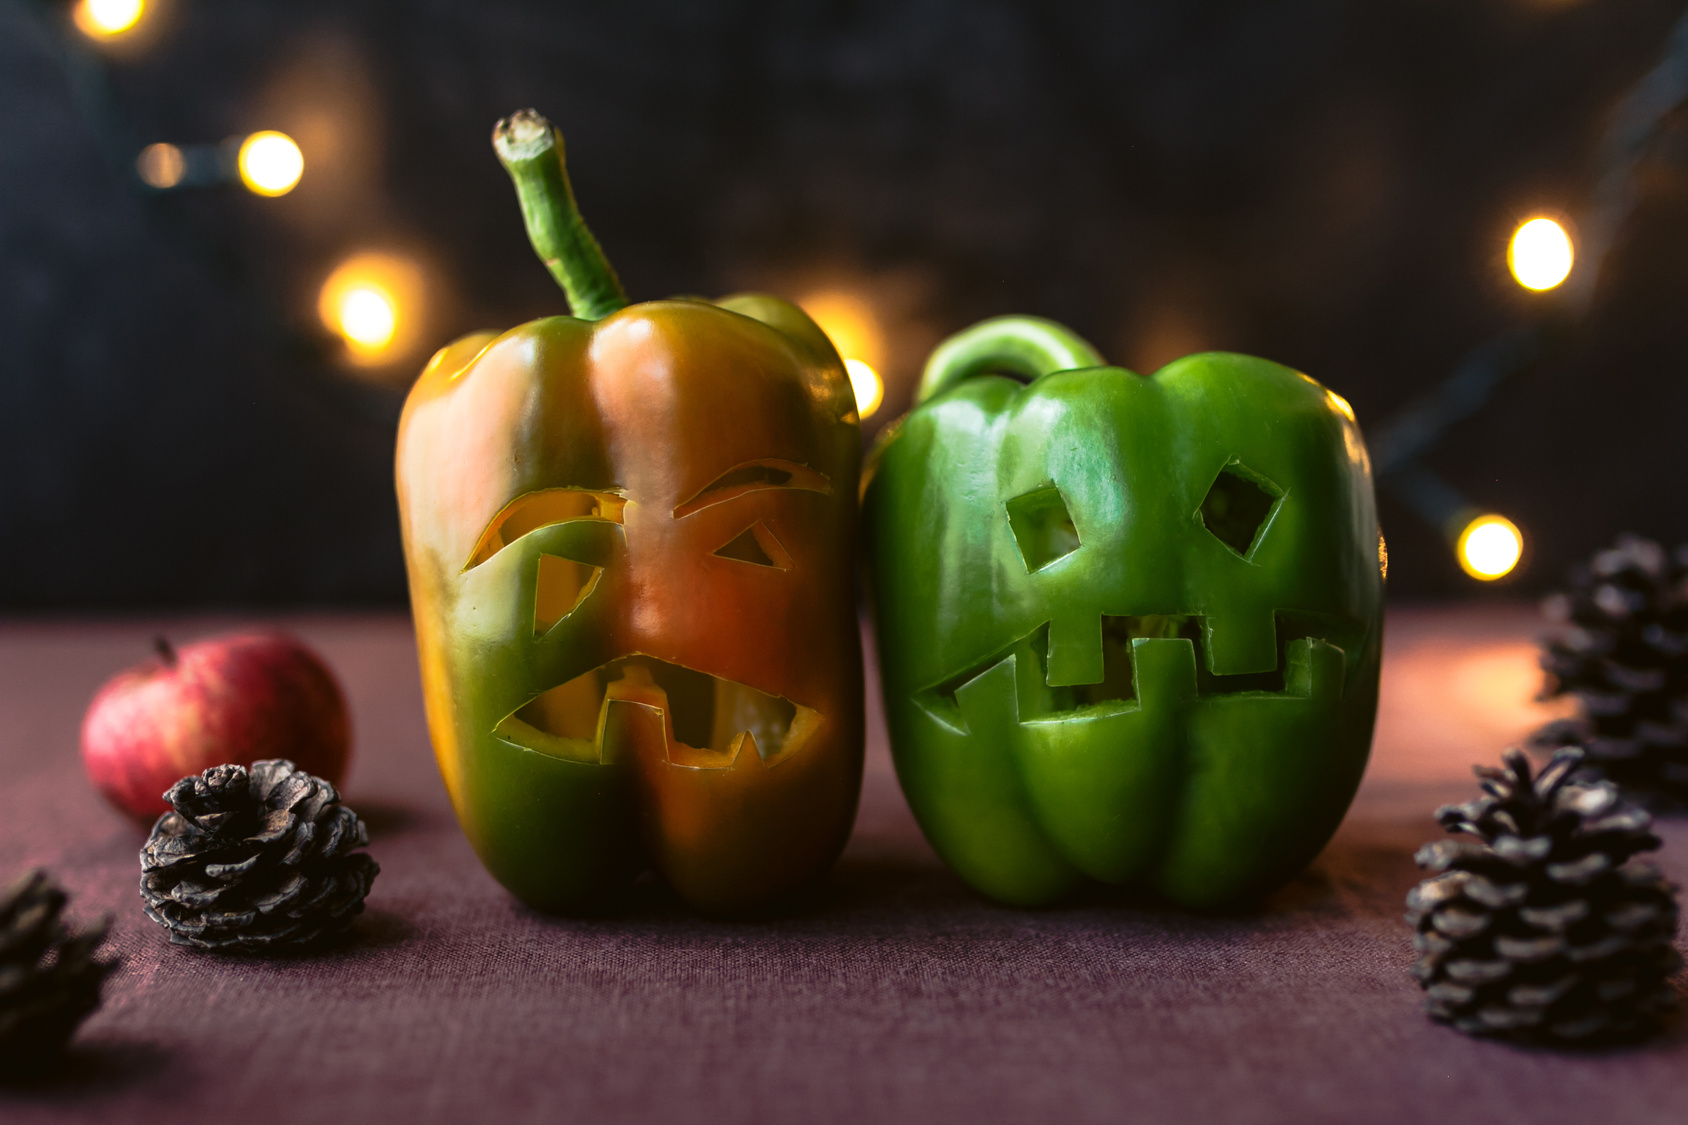 Halloween theme. Halloween peppers with scary faces.